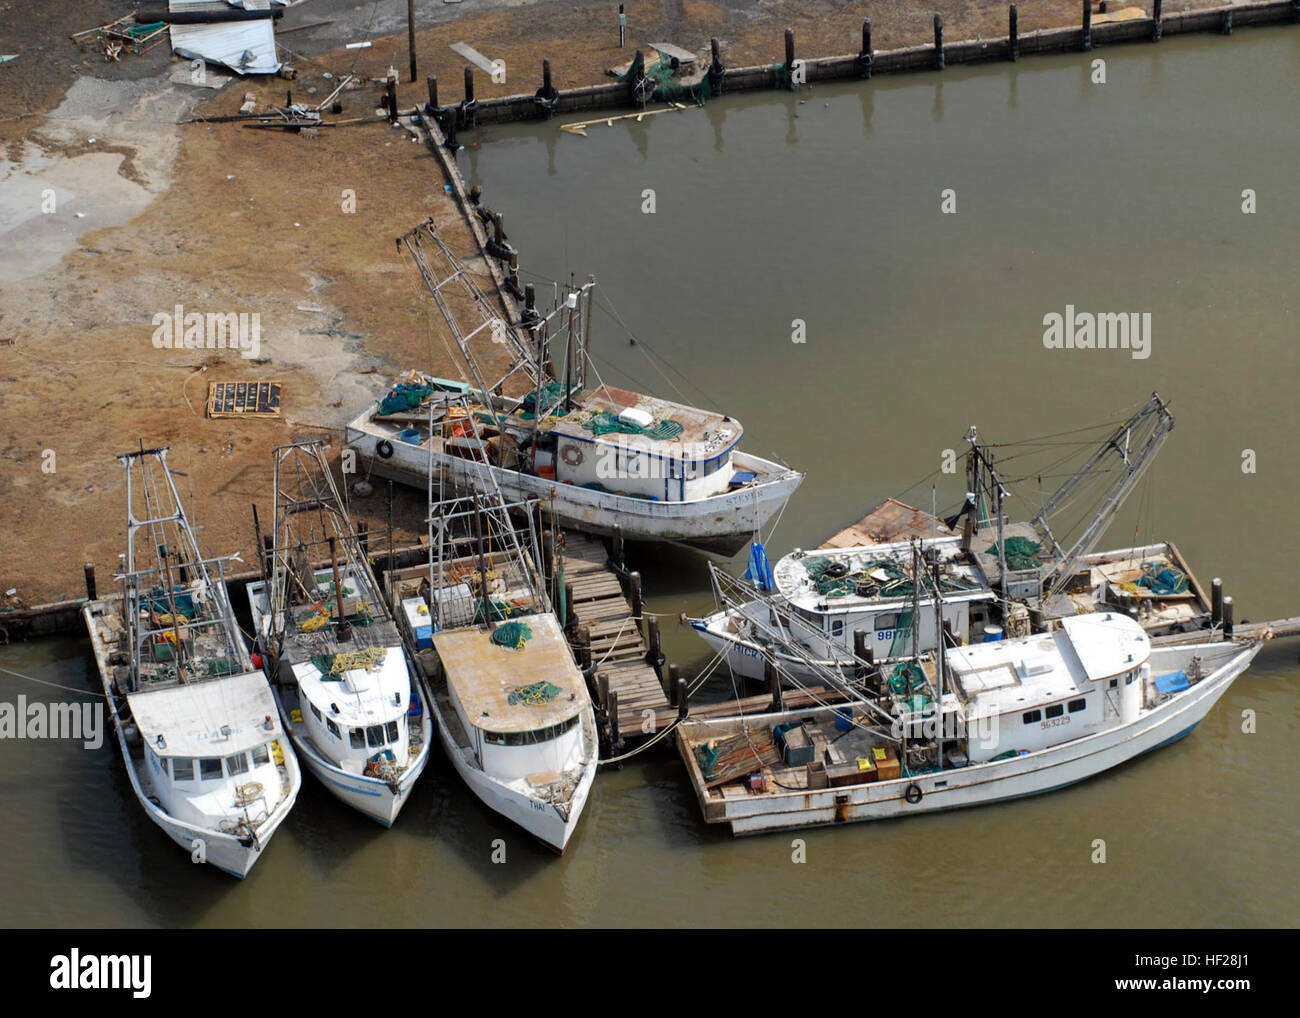 Damaged boats are seen in this aerial photograph at a boatyard on the Bolivar Peninsula in Galveston, Texas. Hurricane Ike struck the Texas Gulf Coast as a strong Category 2 storm, Sept. 13, 2008, causing widespread damage to the region. Flickr - DVIDSHUB - Hurricane Ike Damage in Galveston, Texas Stock Photo